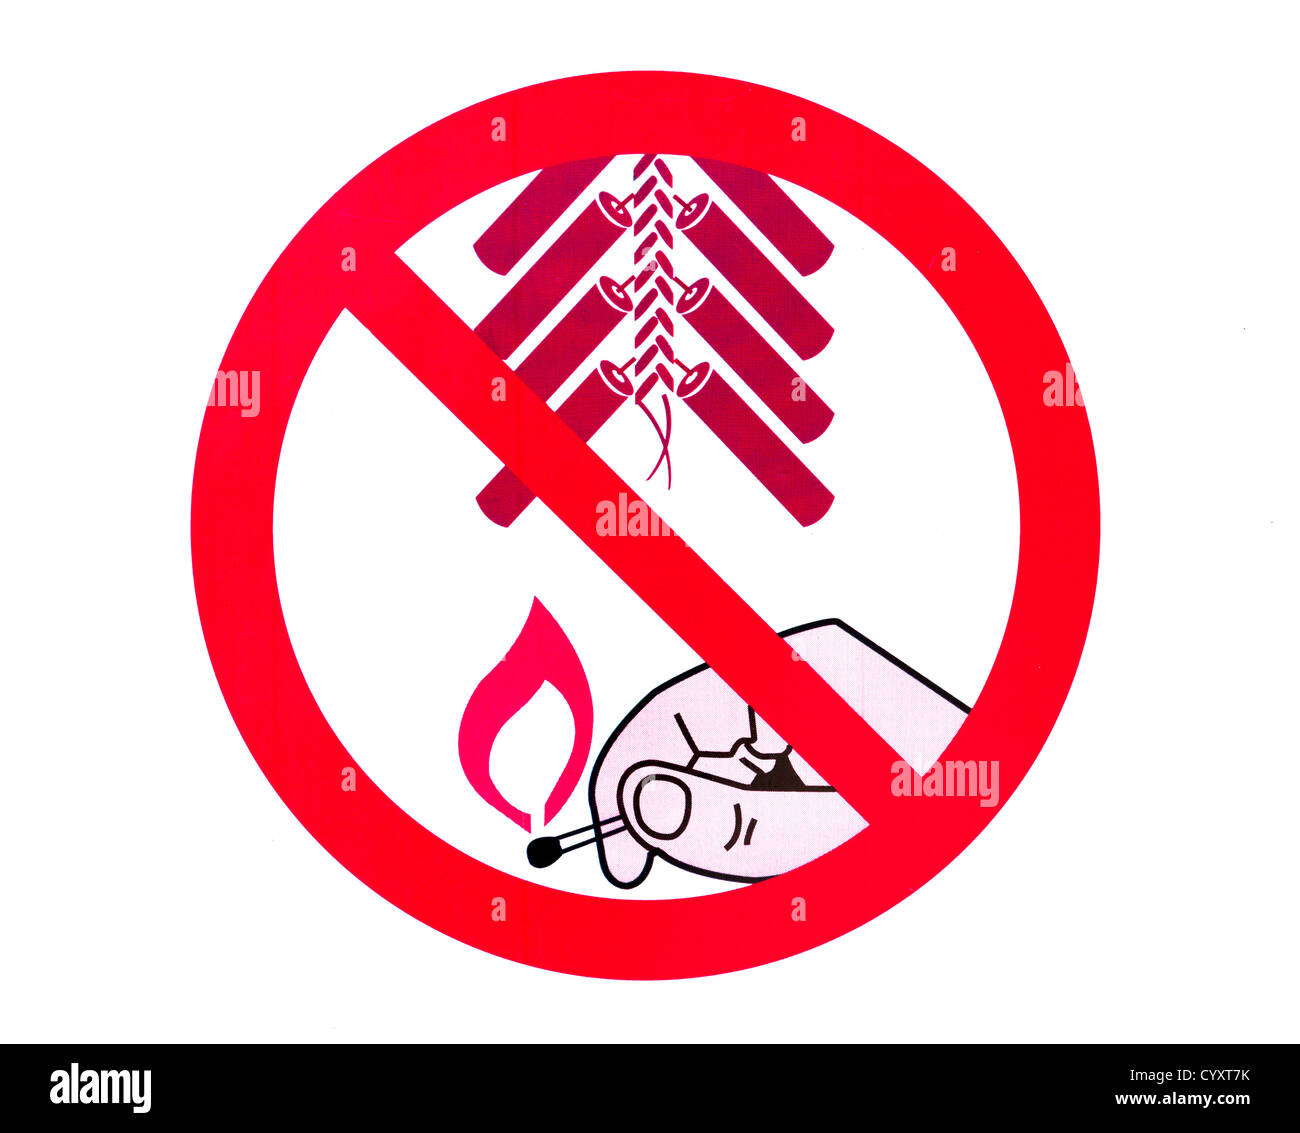 No fireworks sign common in China Stock Photo